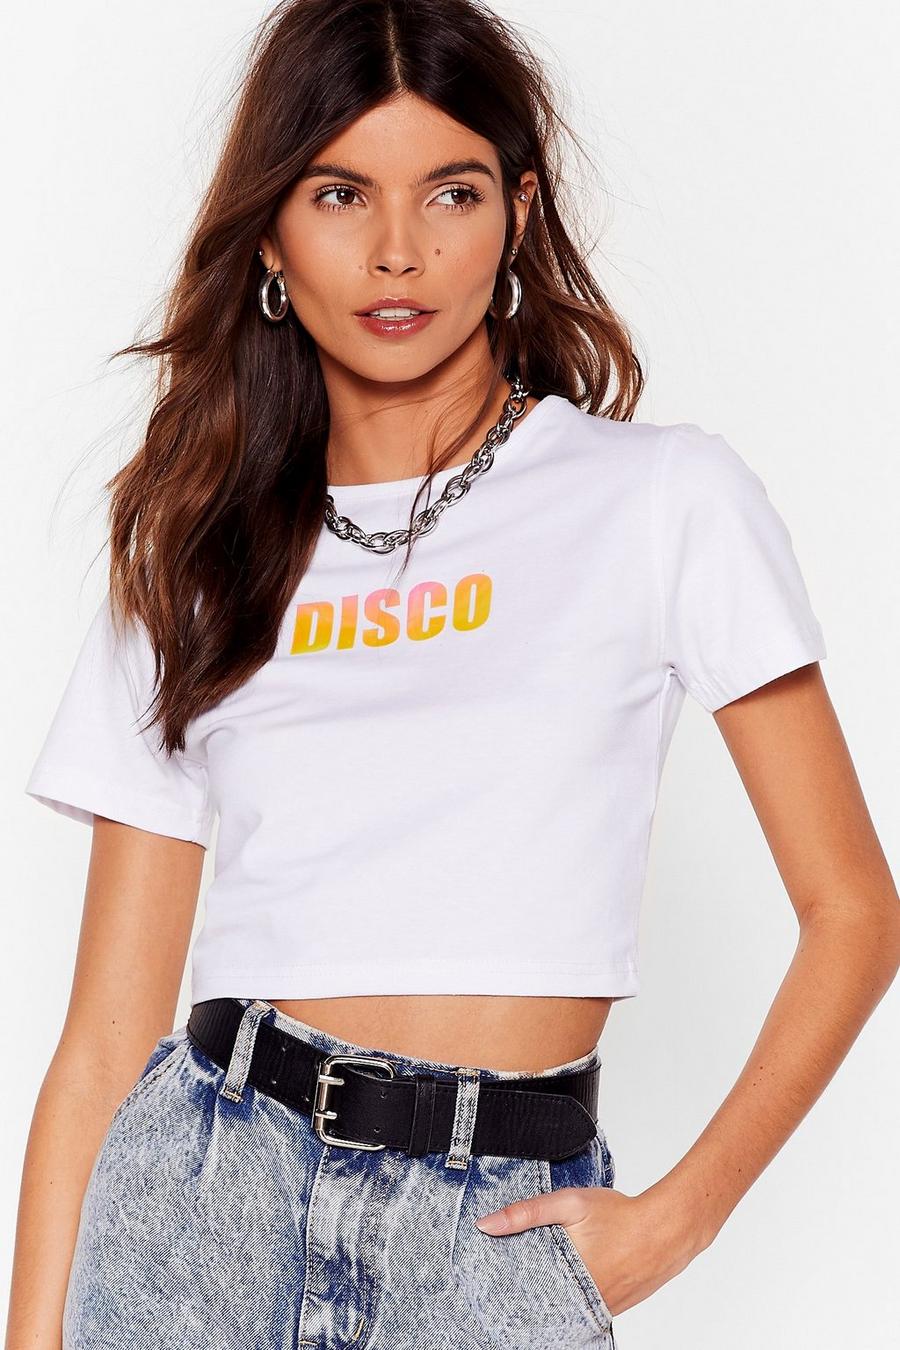 It's Disco Night Iridescent Cropped Graphic Tee